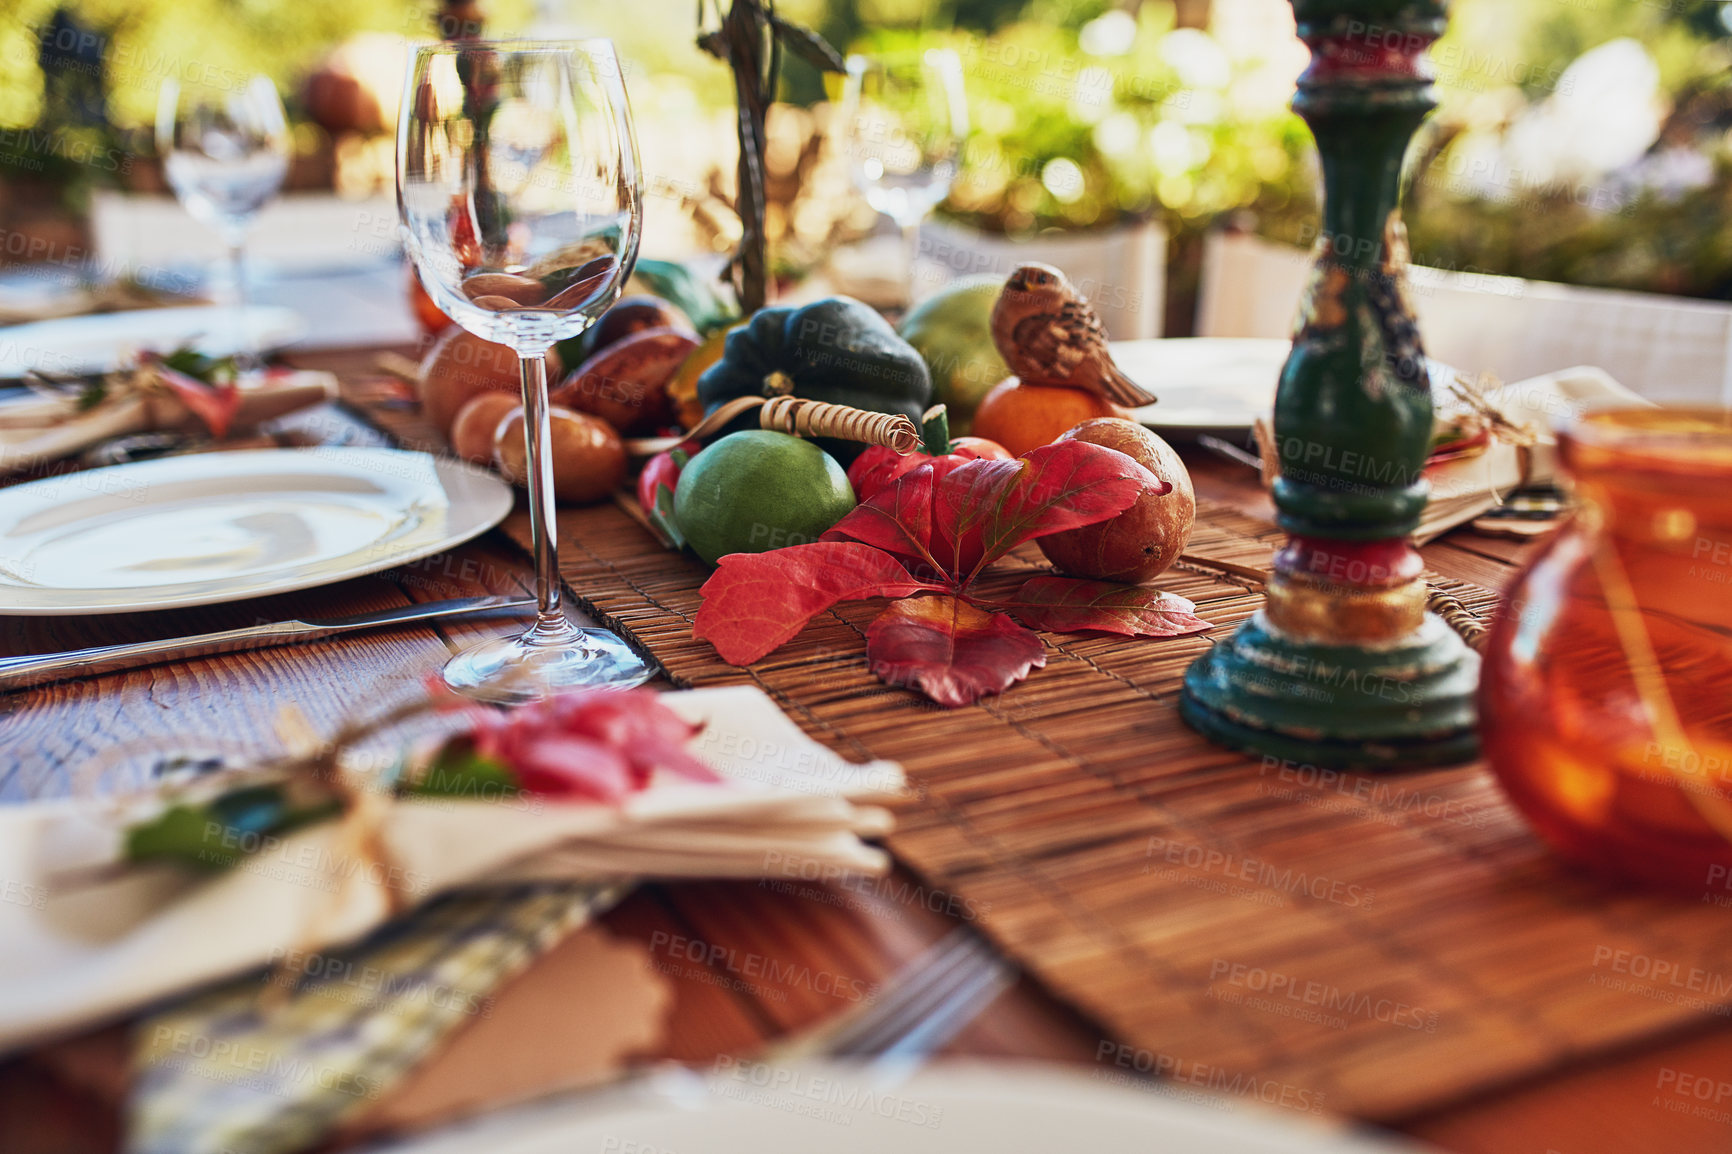 Buy stock photo Cropped shot of a the layout of a Thanksgiving dining table